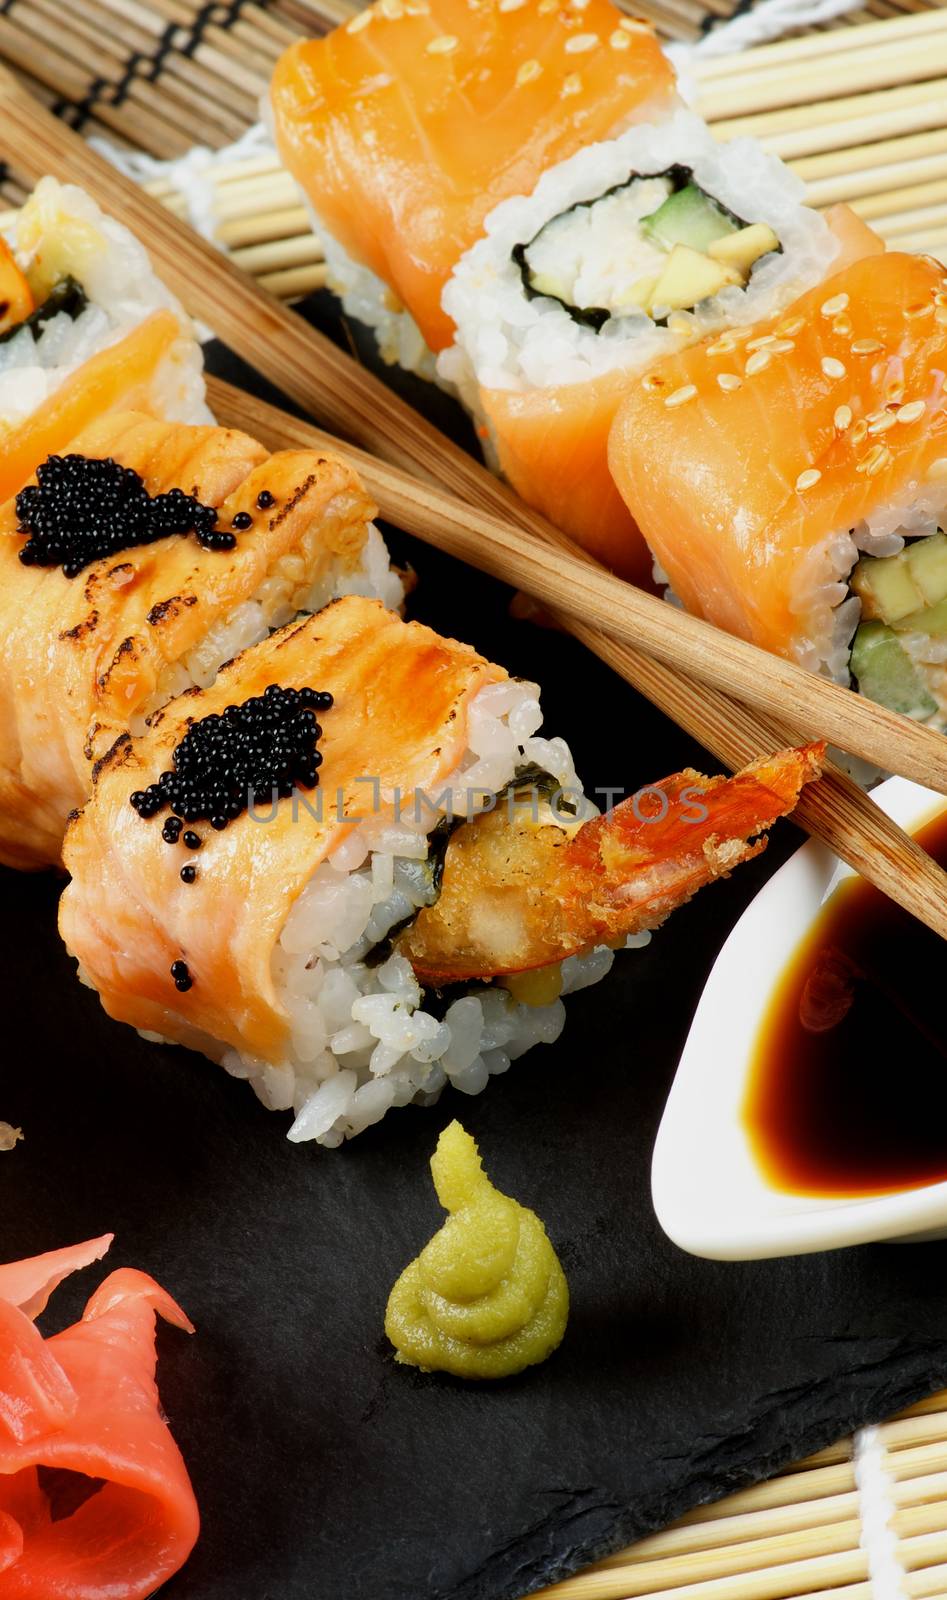 Arrangement of Maki Sushi with Smoked Salmon and Eel with Black Caviar on Stone Plate with Soy Sauce, Ginger and Pair of Chopsticks closeup on Straw Mat background